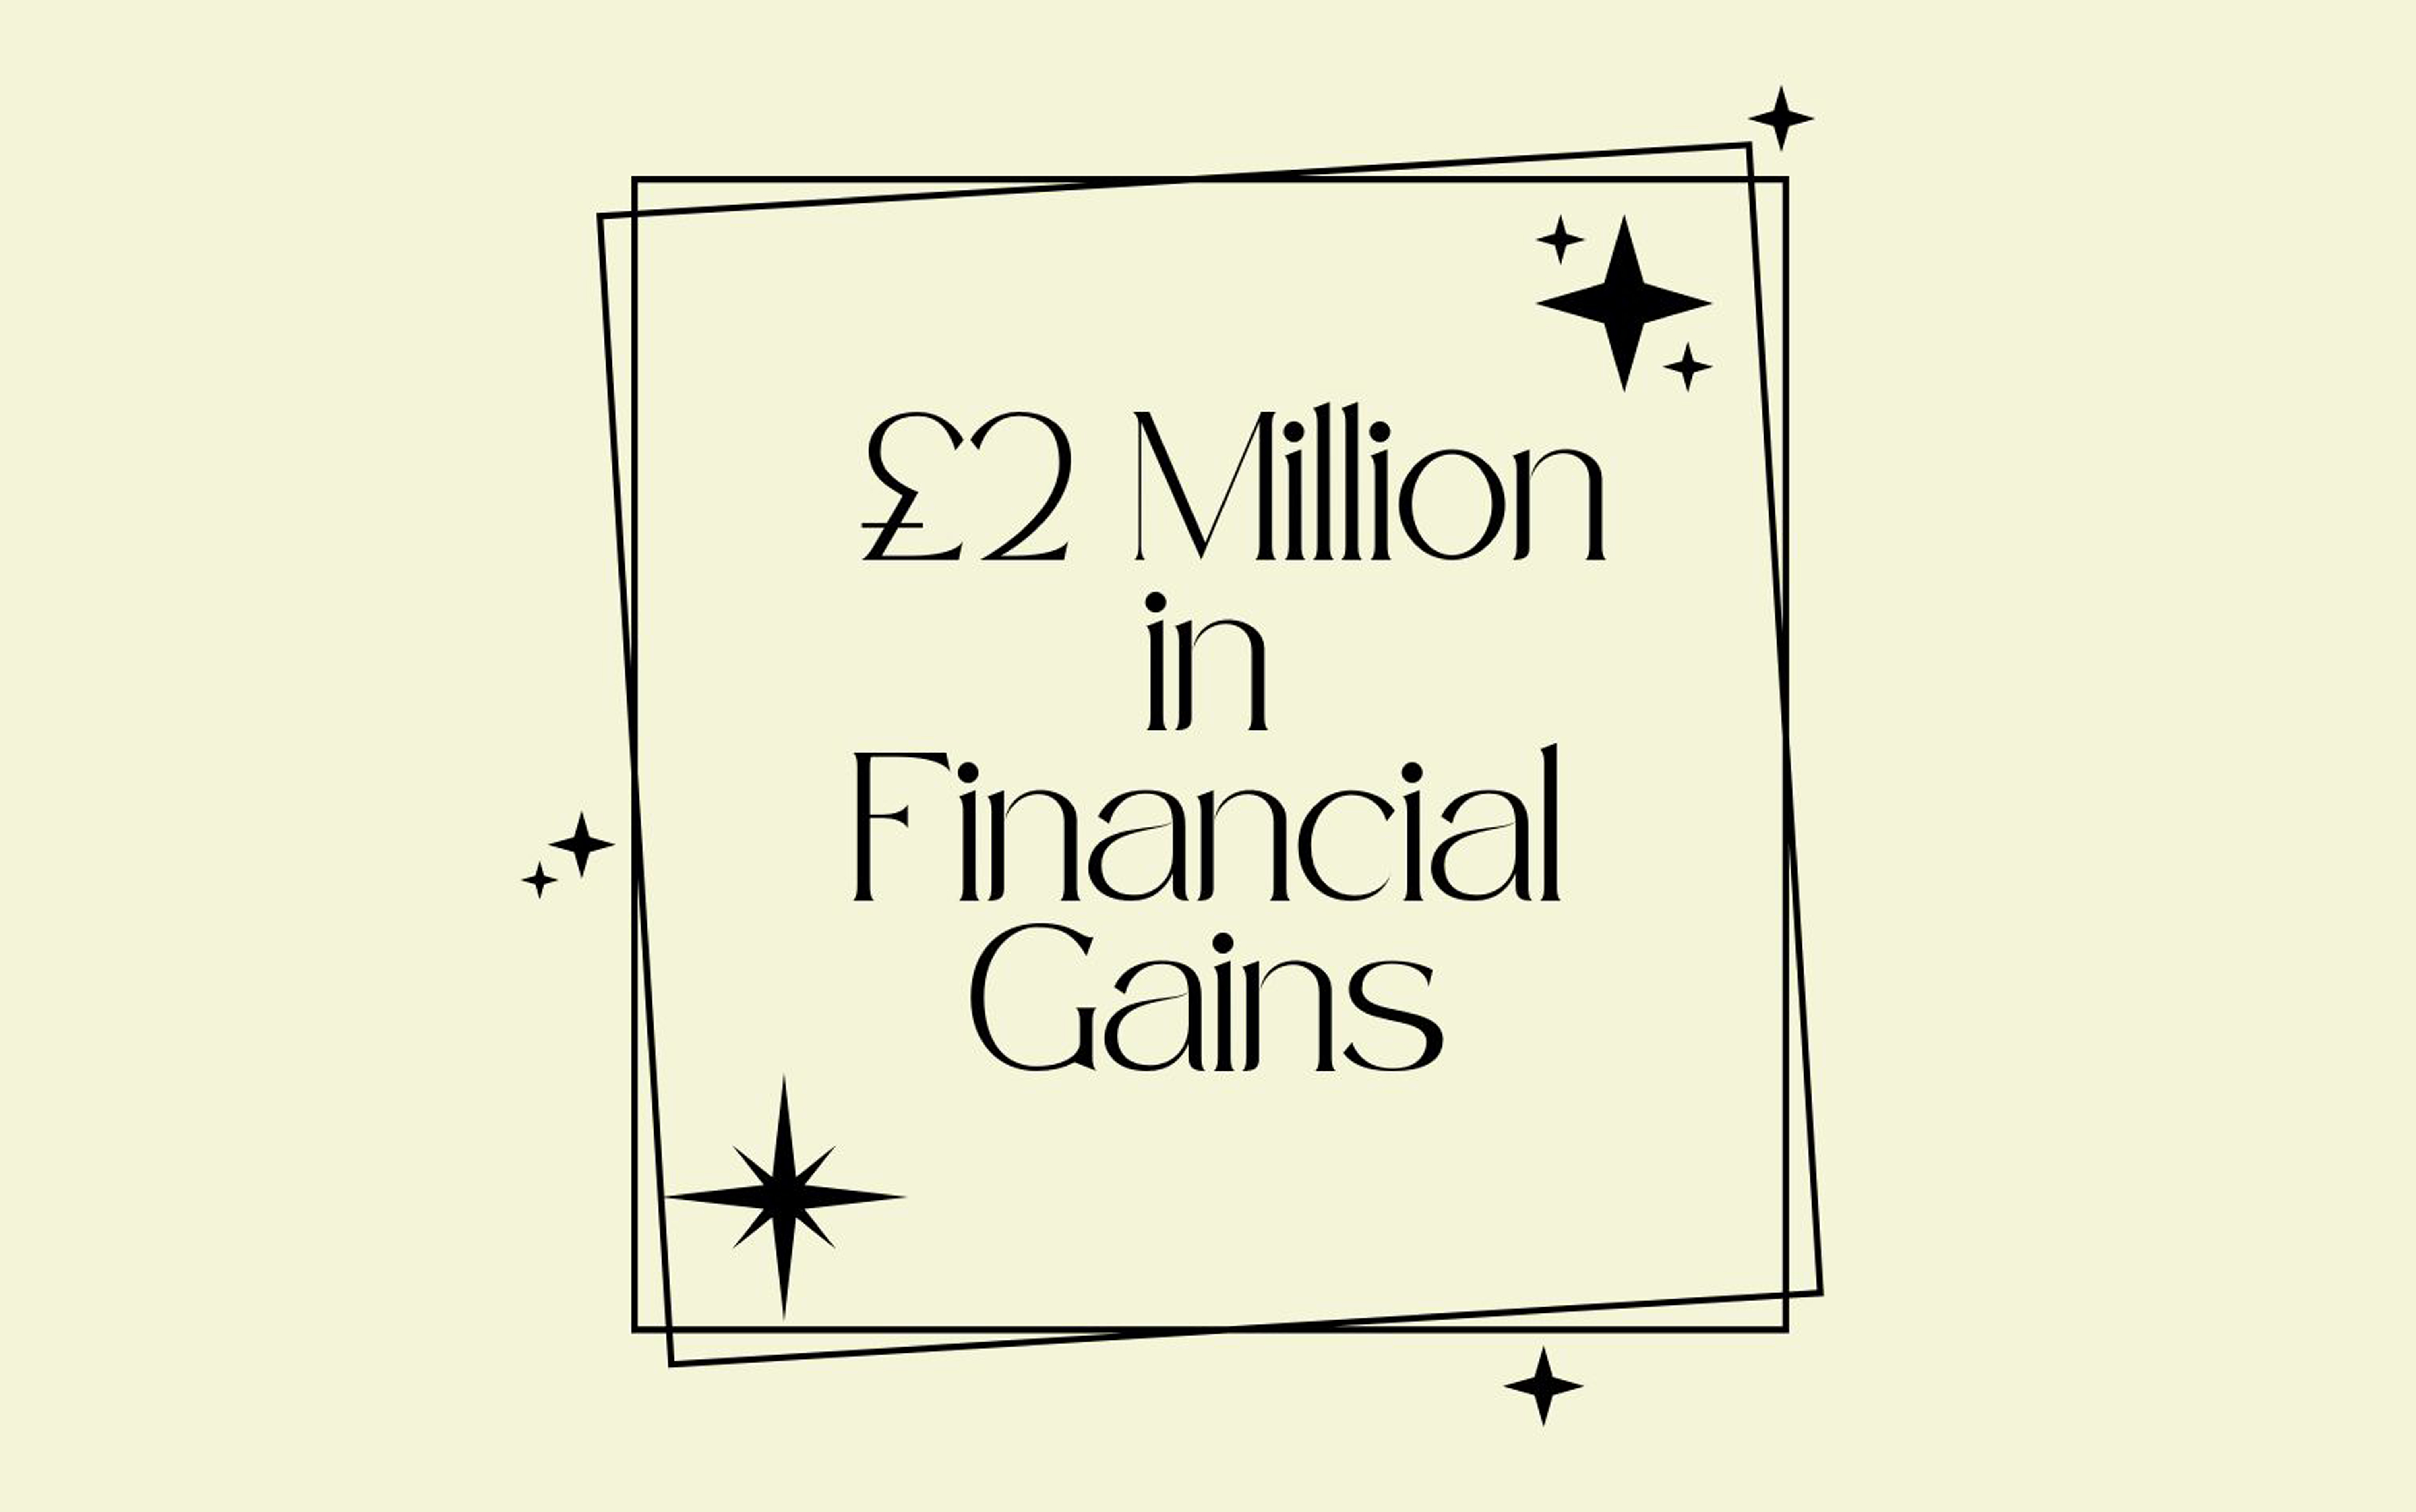 We achieved over £2 million in financial gains in 2023